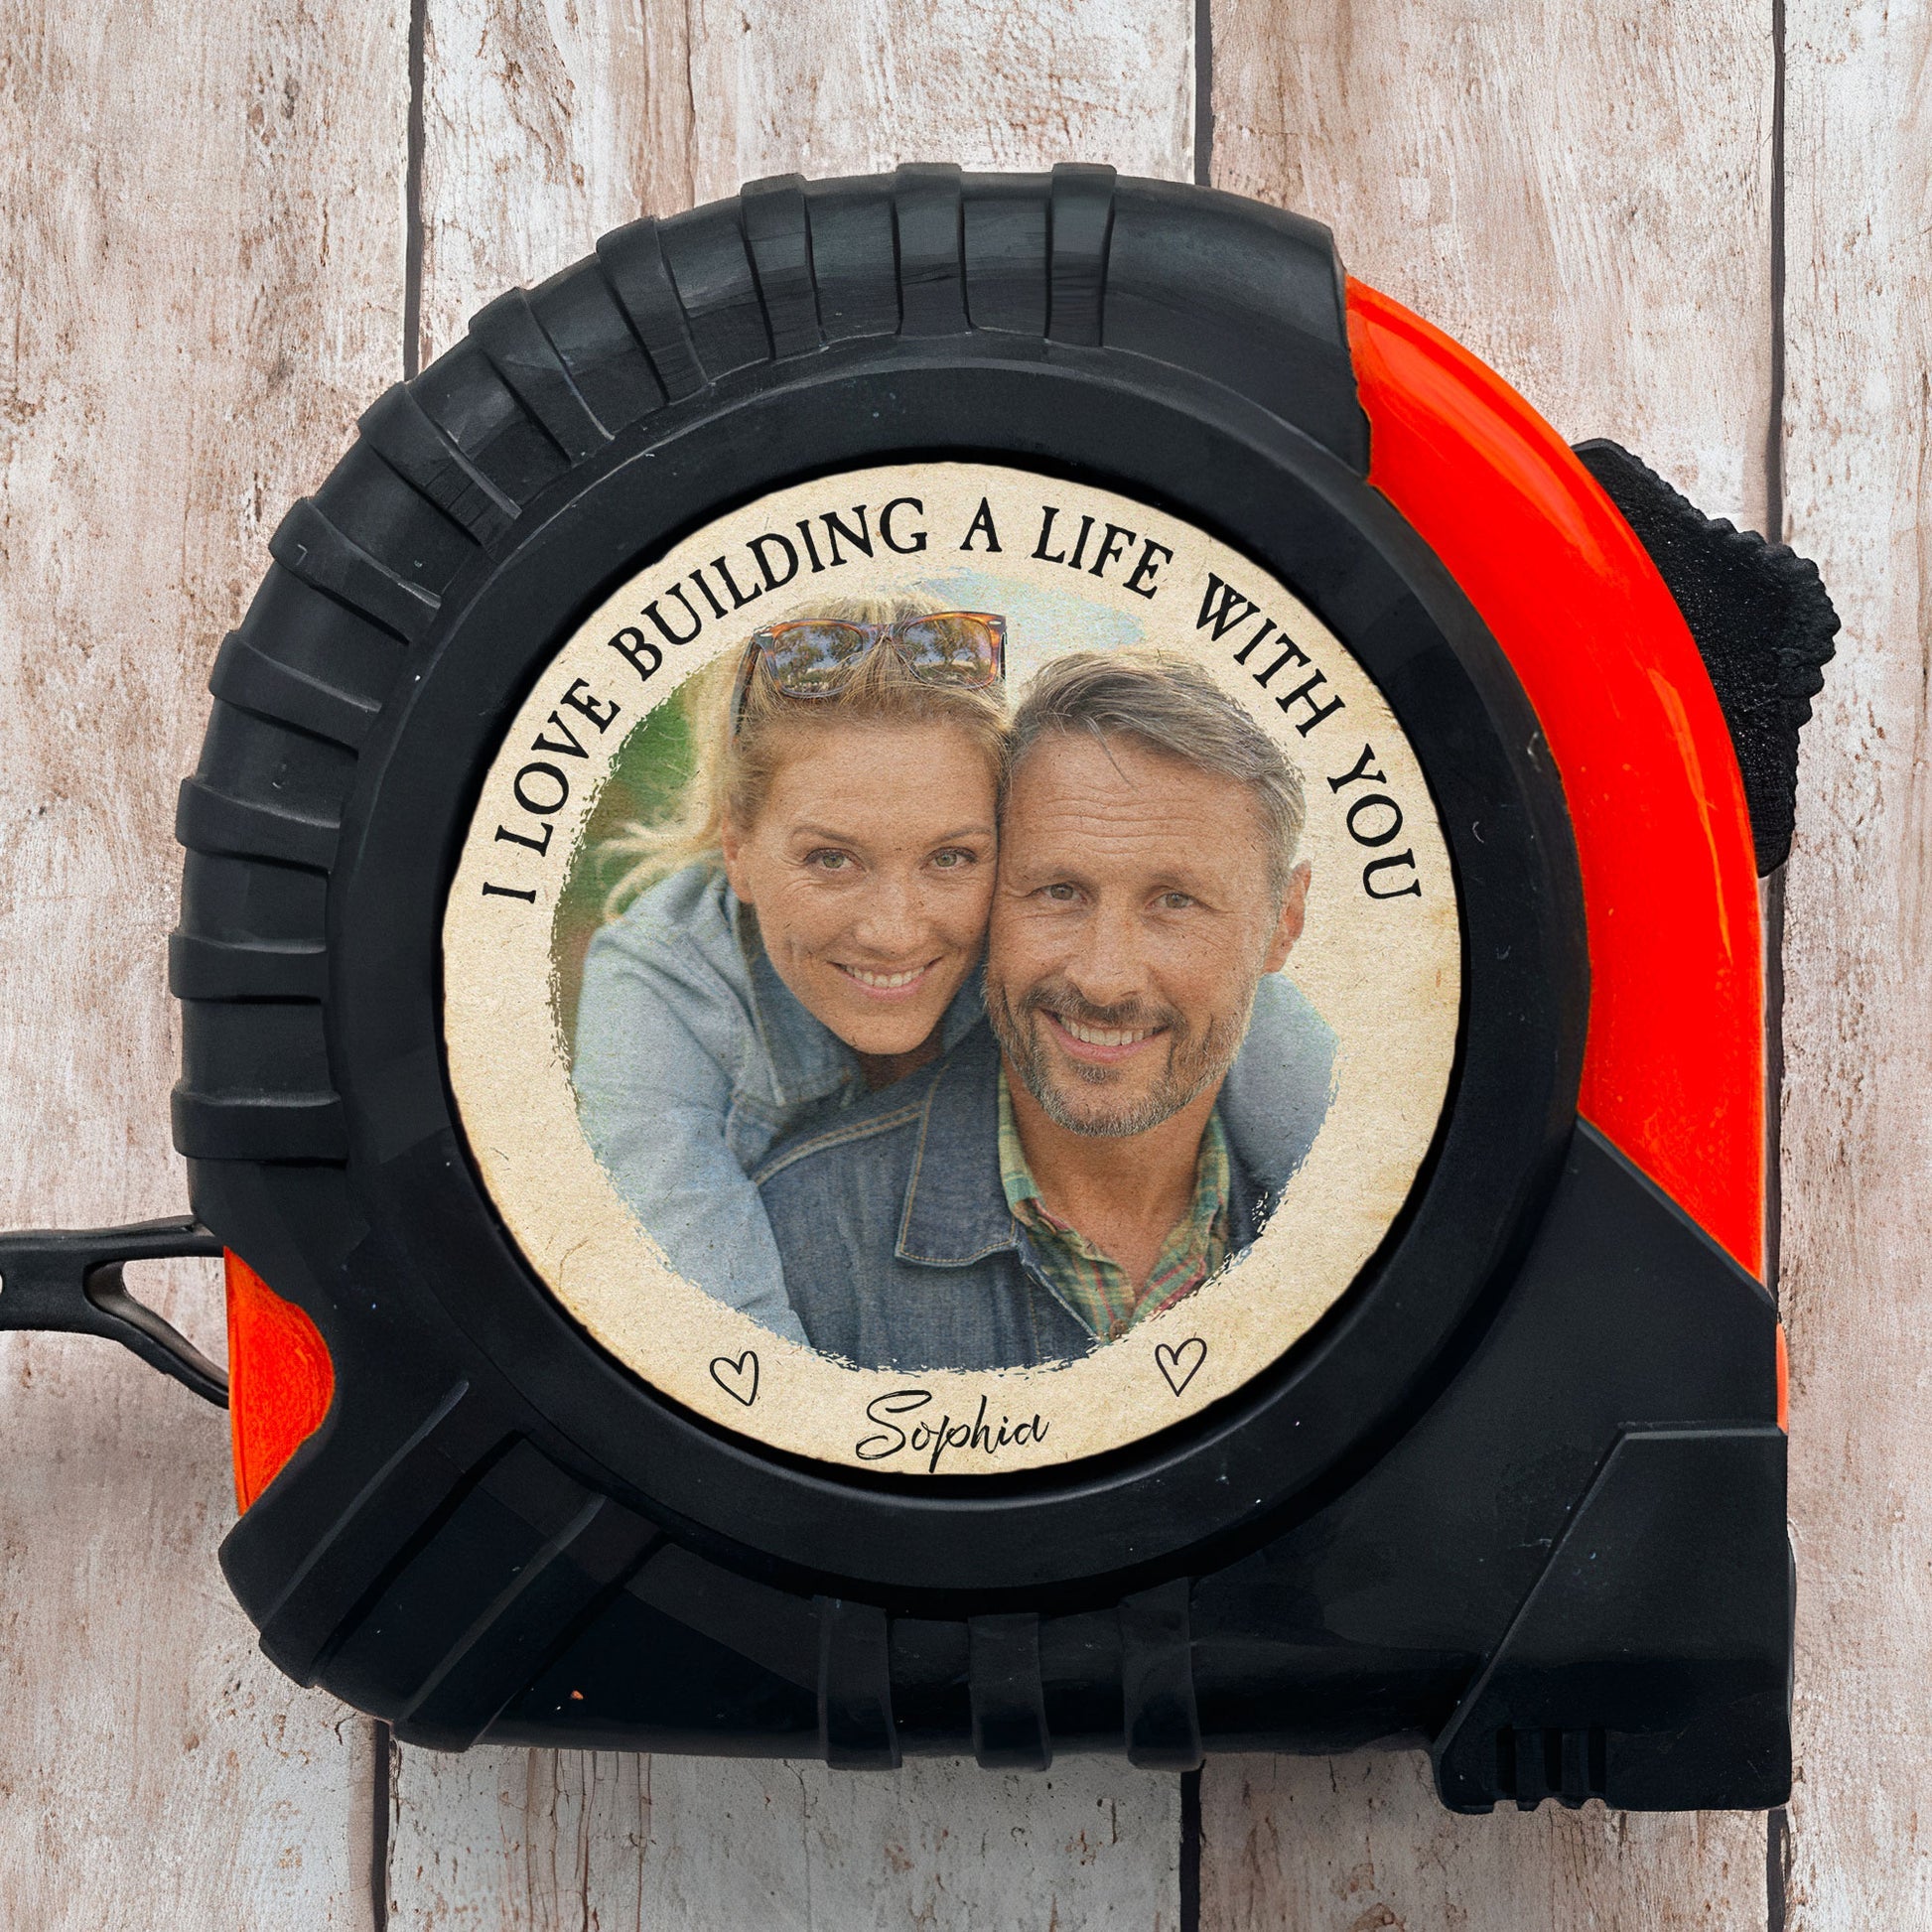 I Love Building A Life With You - Personalized Photo Tape Measure